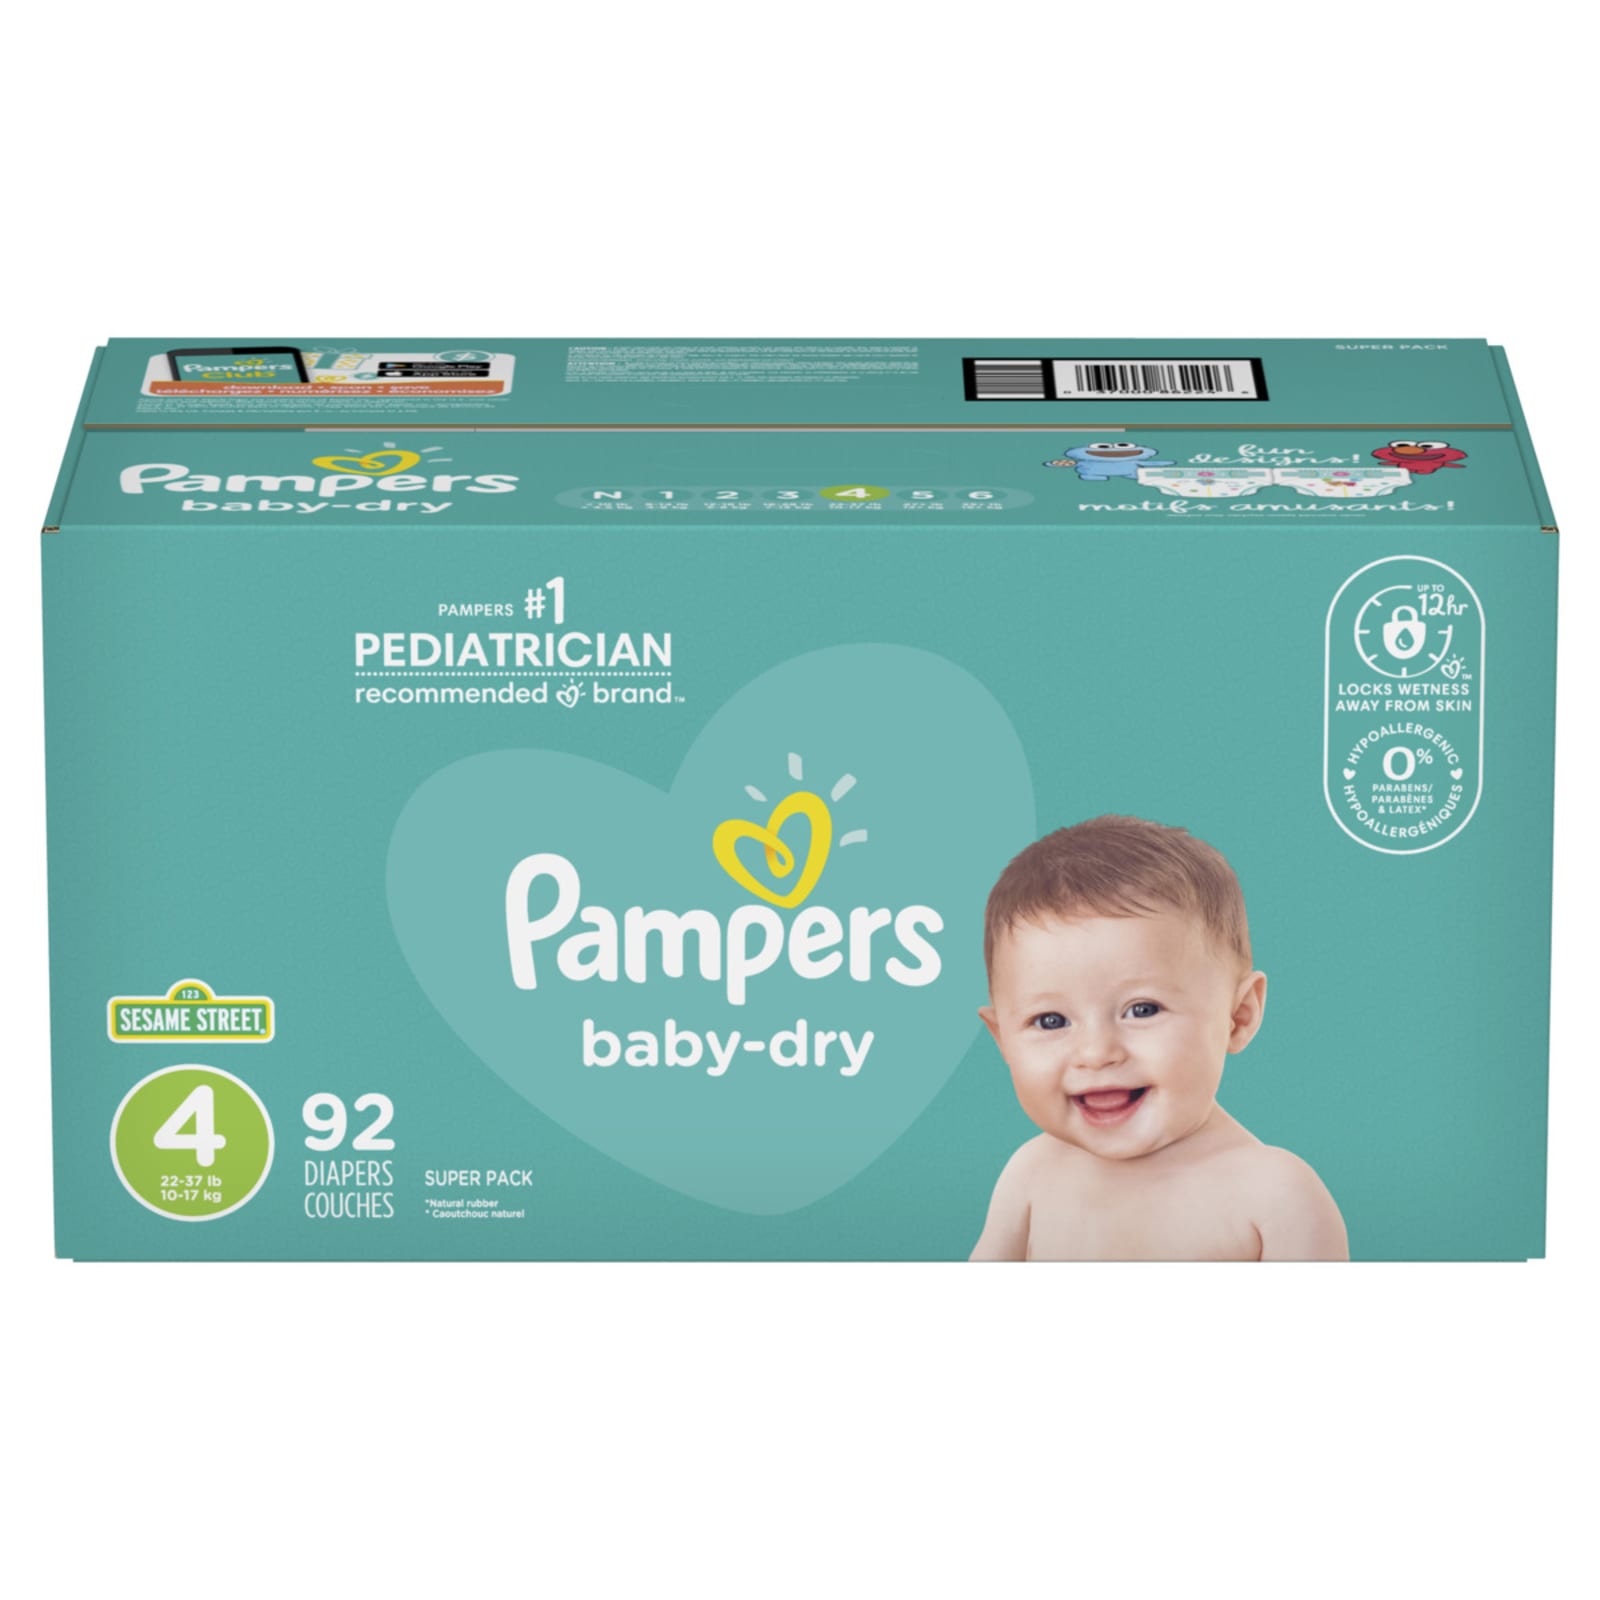 Maxim heldin pianist Pampers Baby Dry Super Pack Size 4 Diapers - 92 Ct by Pampers at Fleet Farm